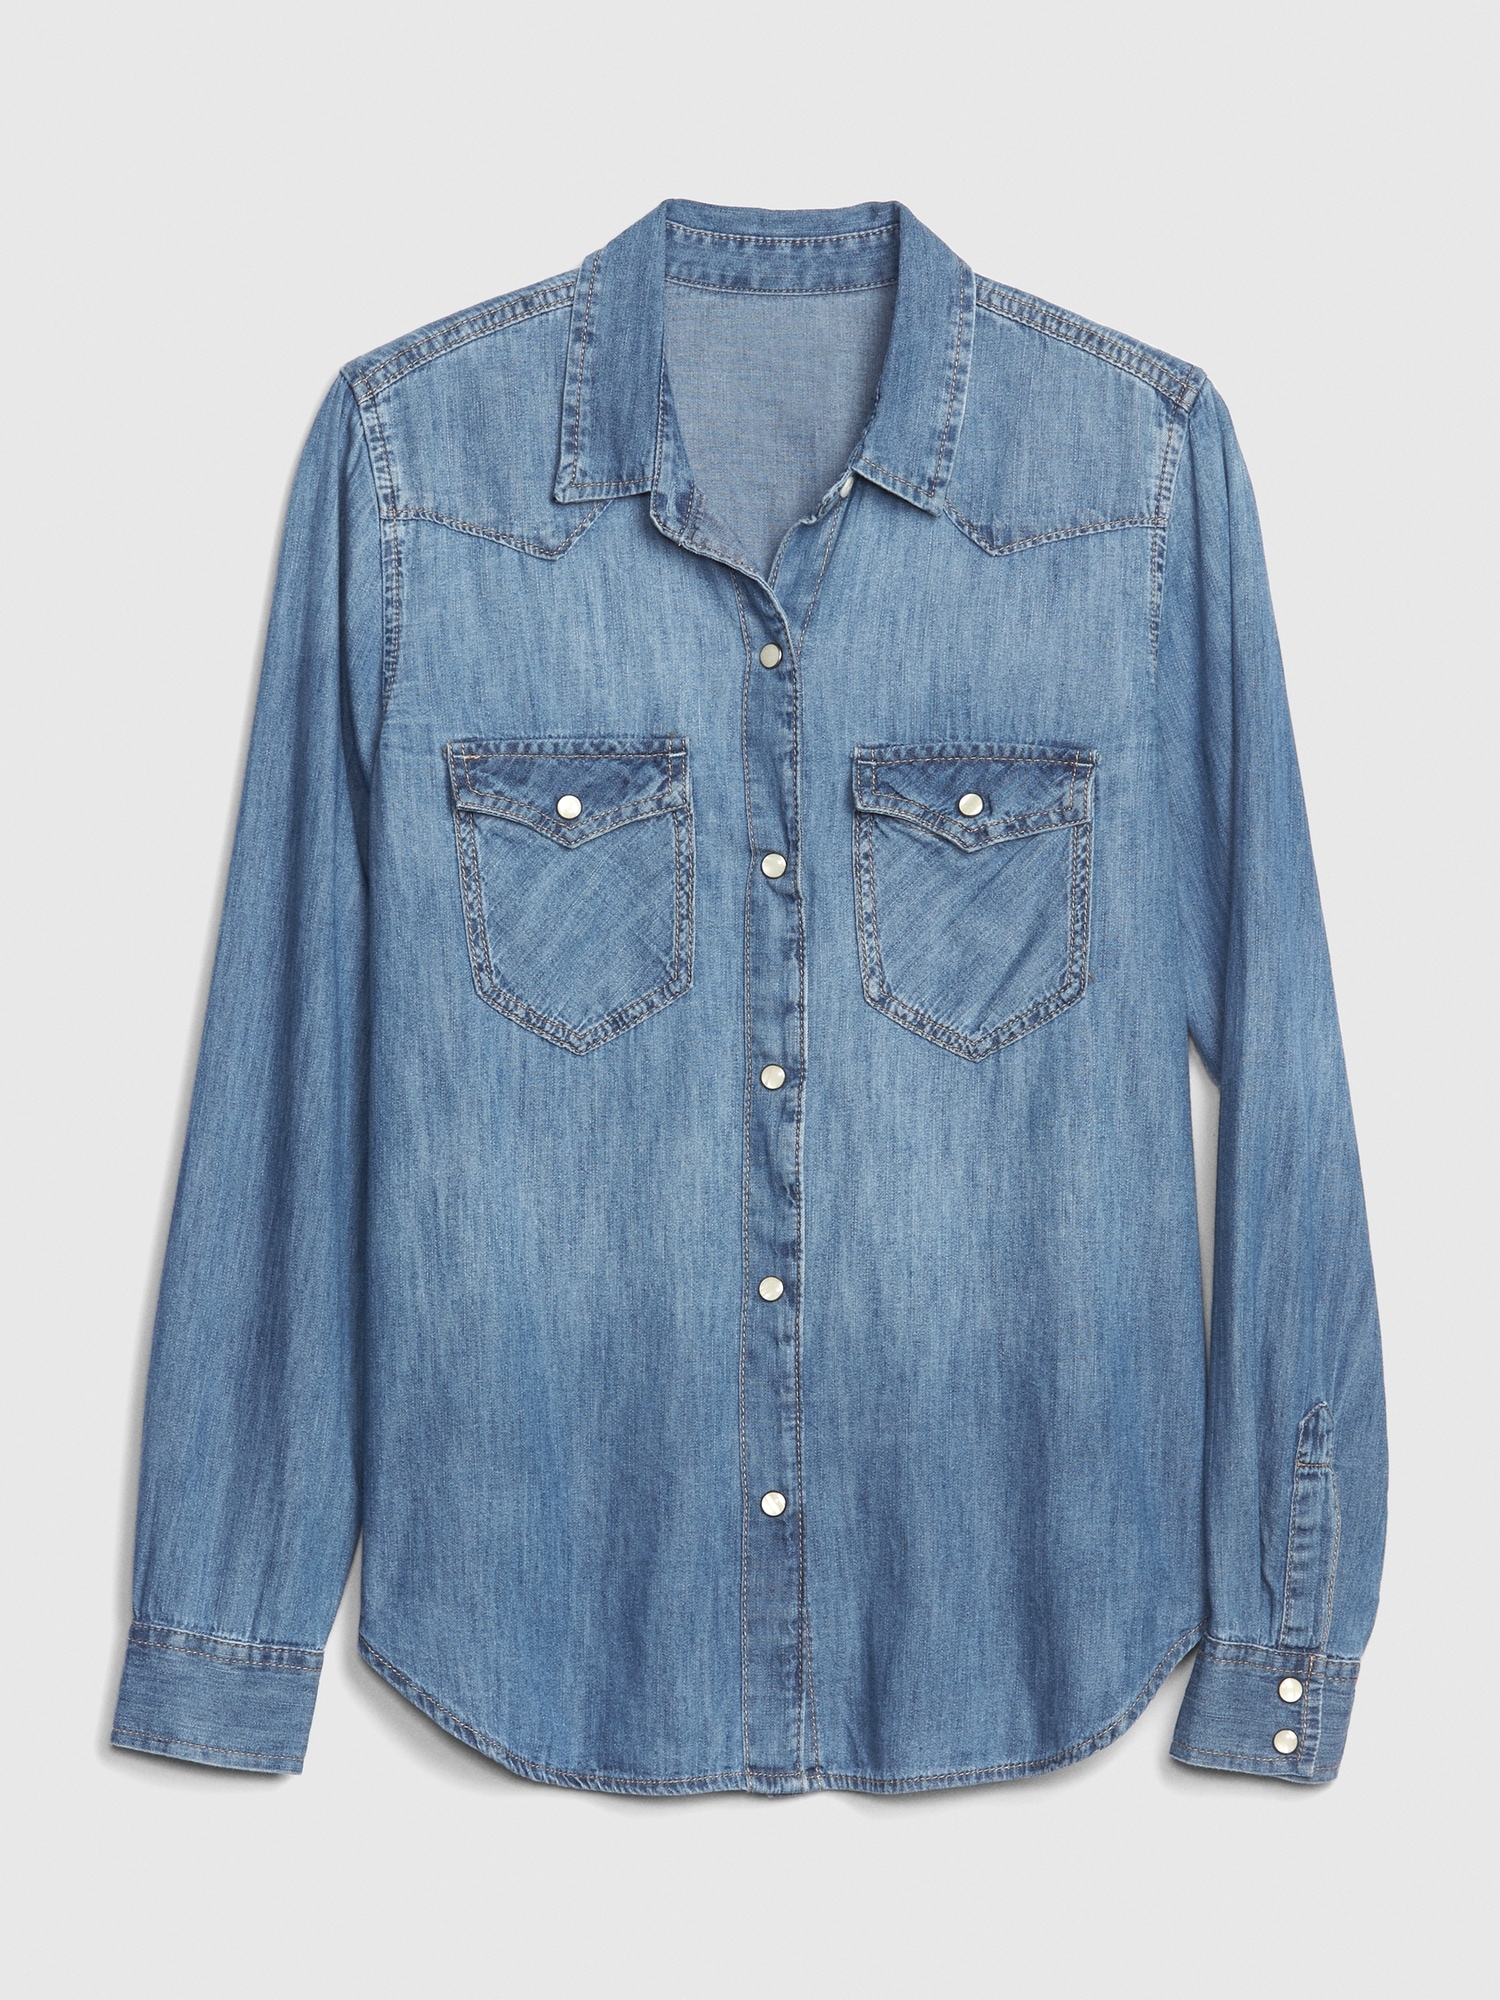 denim shirts with patches